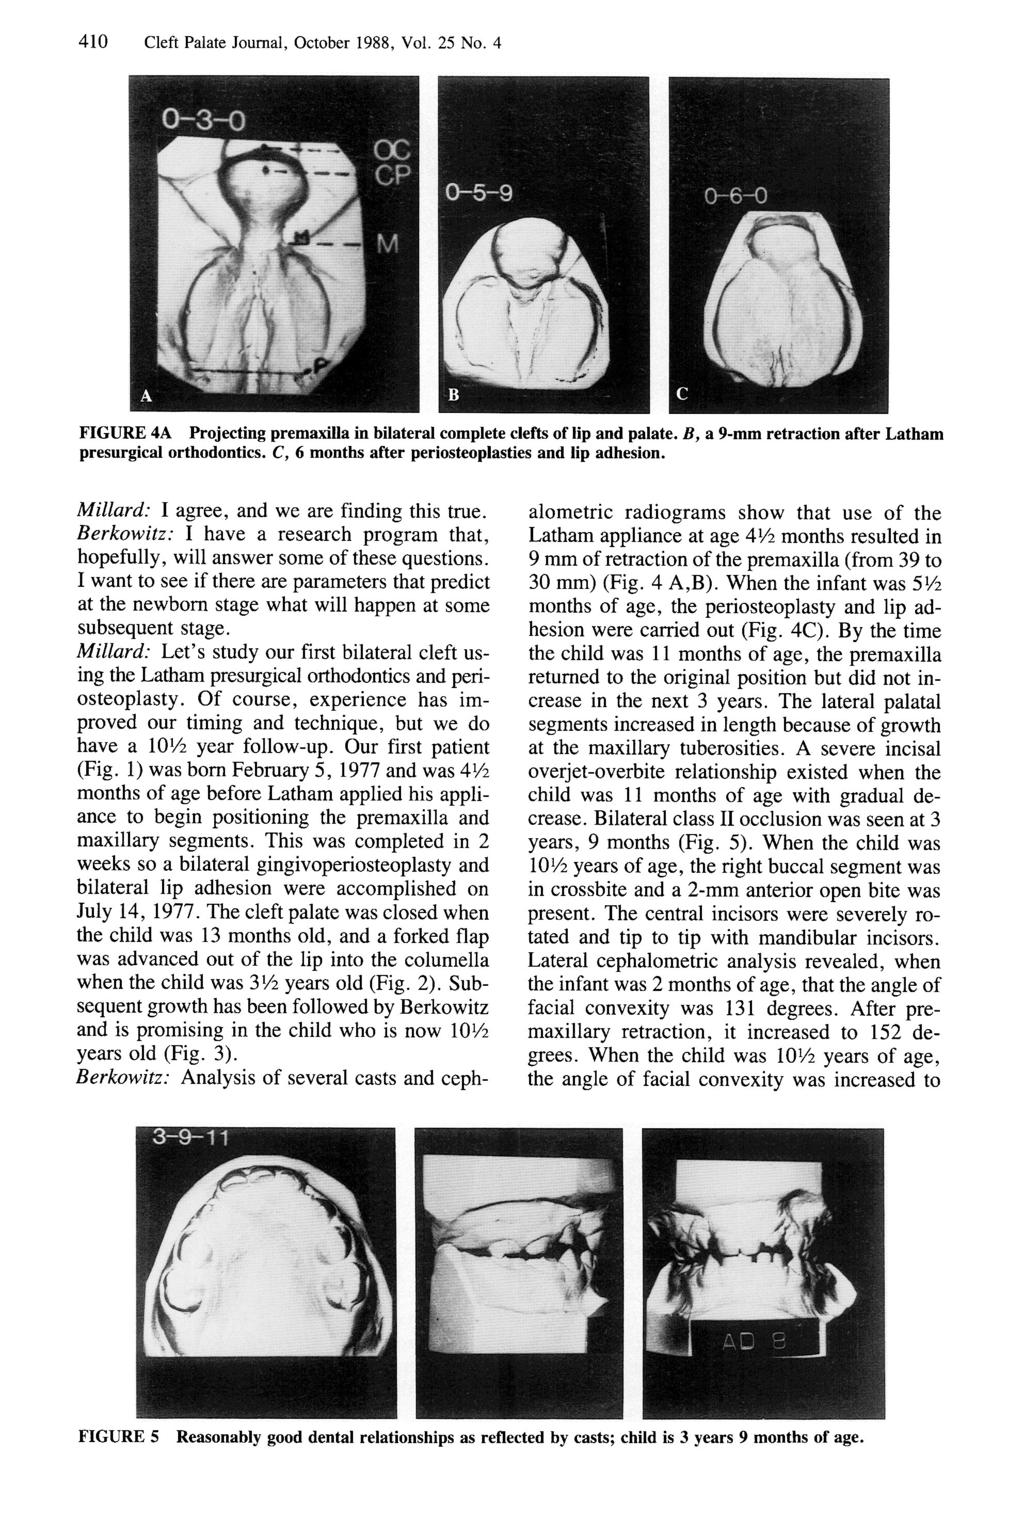 410 Cleft Palate Journal, October 1988, Vol. 25 No. 4 FIGURE 4A Projecting premaxilla in bilateral complete clefts of lip and palate. B, a 9-mm retraction after Latham presurgical orthodontics.